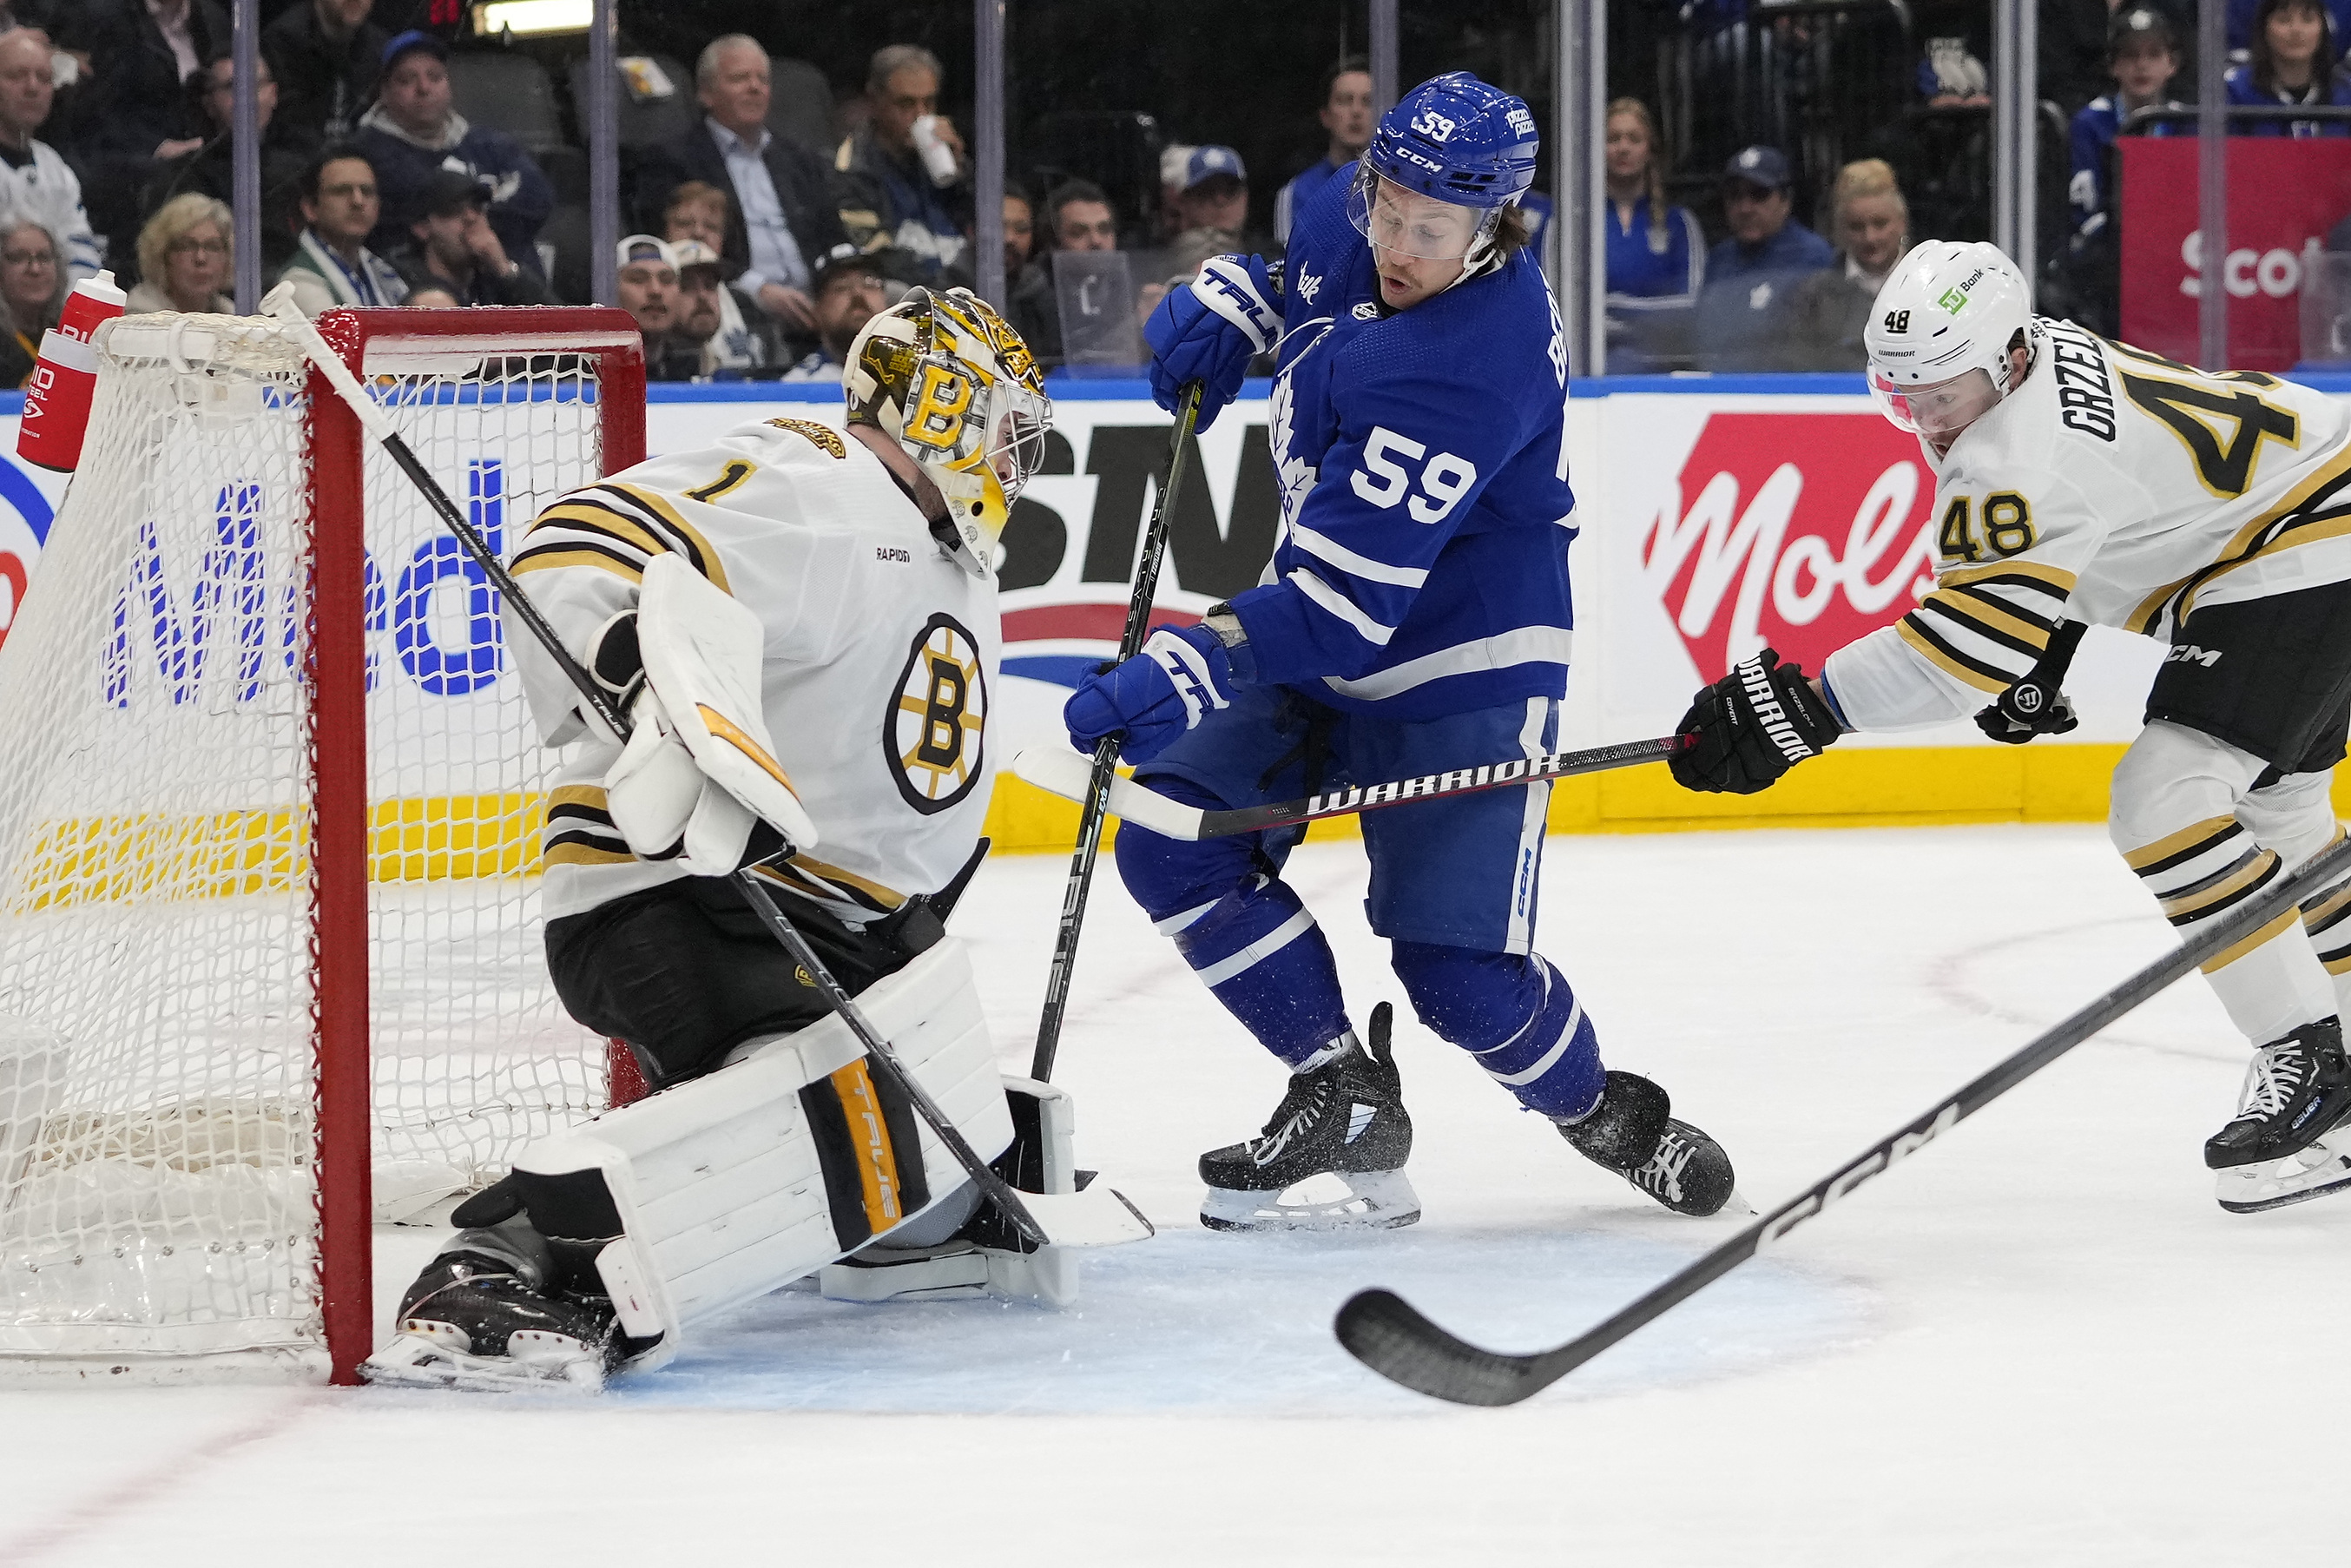 Bruins tackle Maple Leafs to put season sweep of rival in sight | Reuters